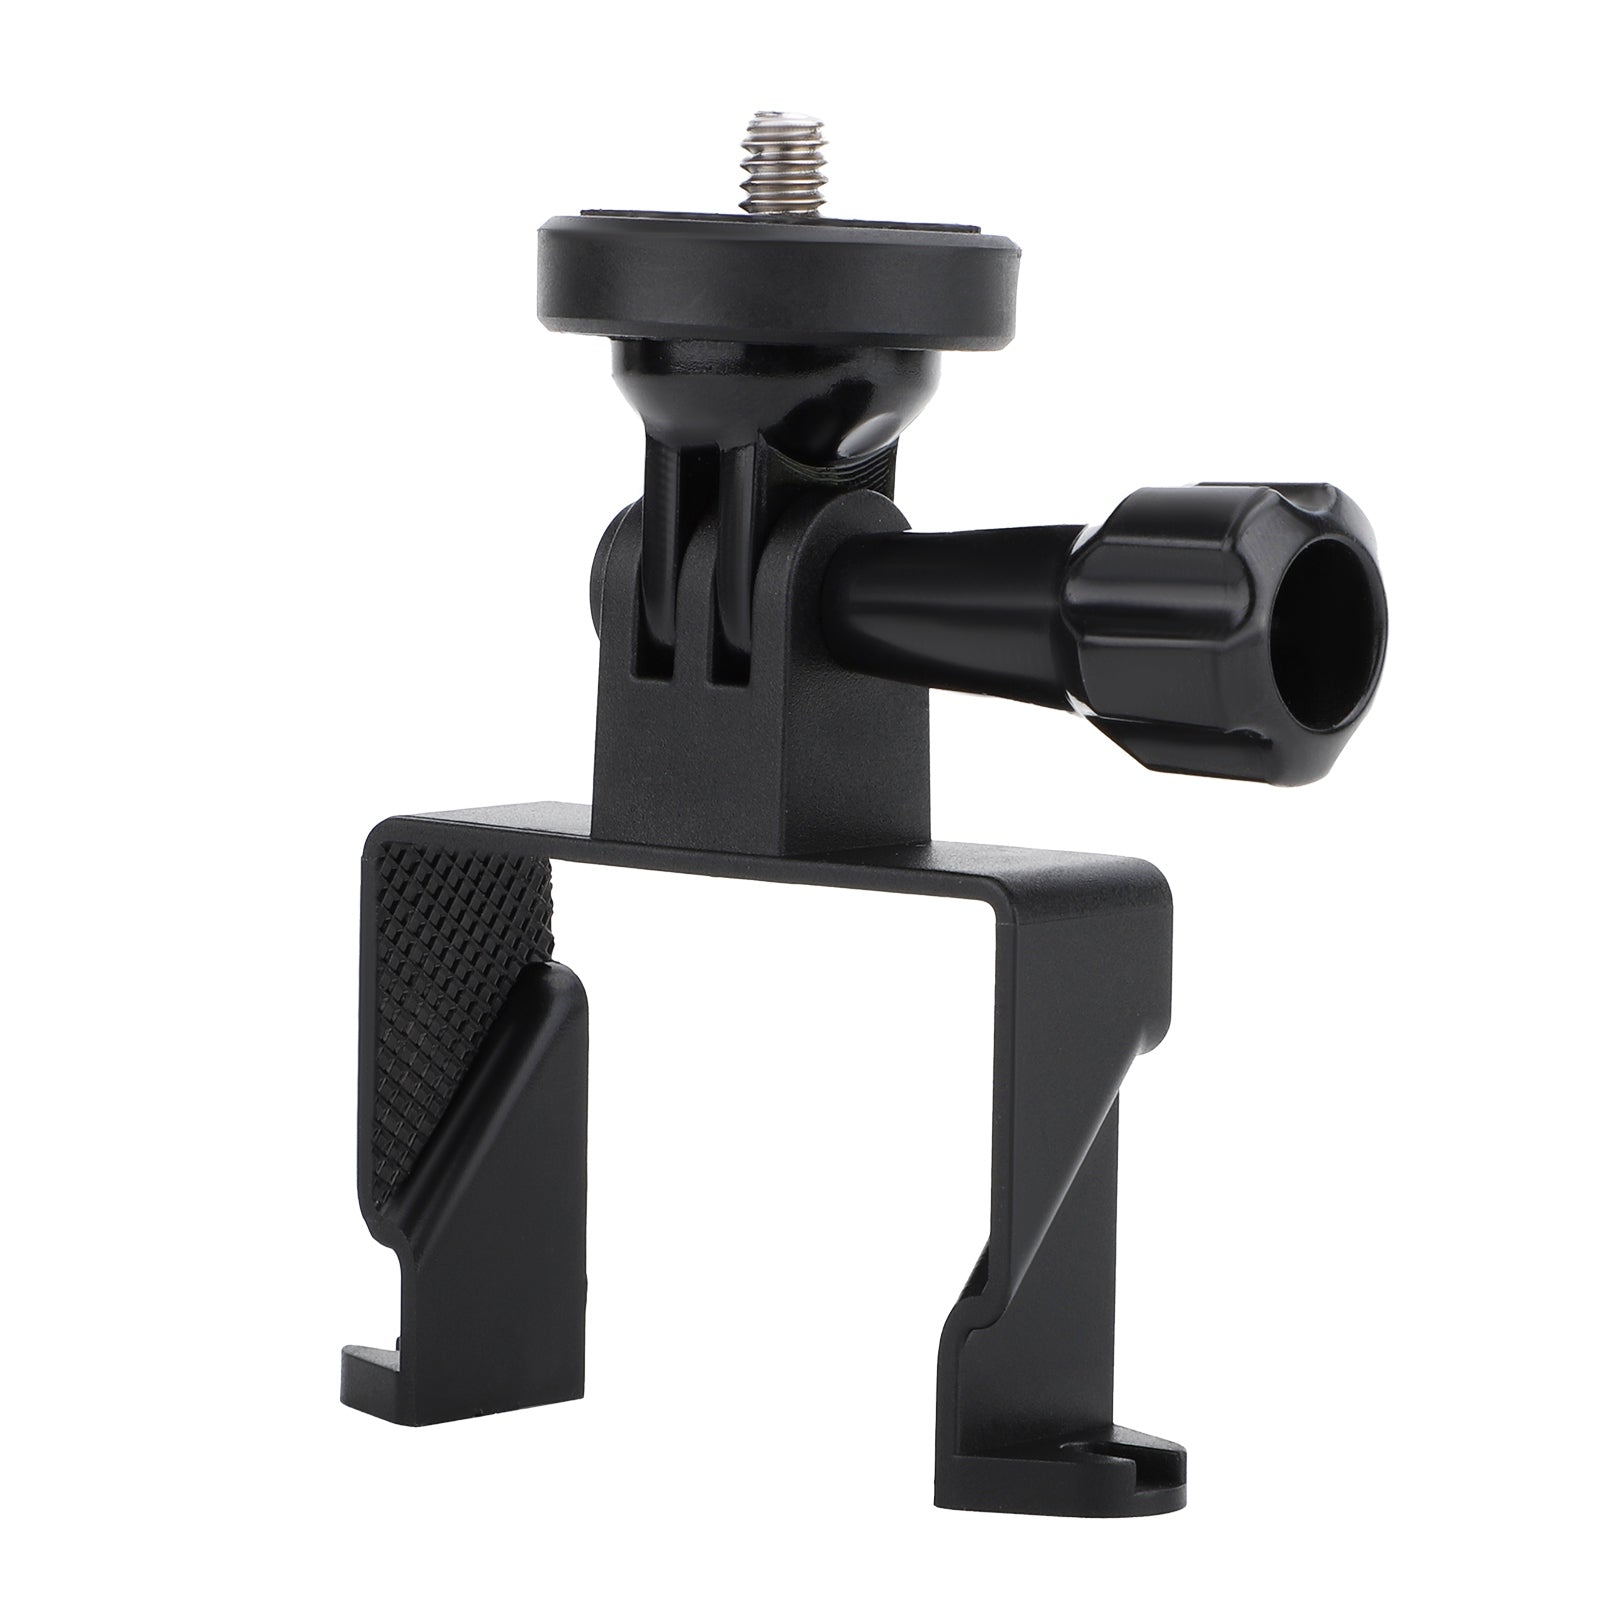 SUNNYLIFE AT-GZ512 Multifunctional Adapter Mount for DJI Avata External Extension Adapter with 1 / 4 Screw Connector